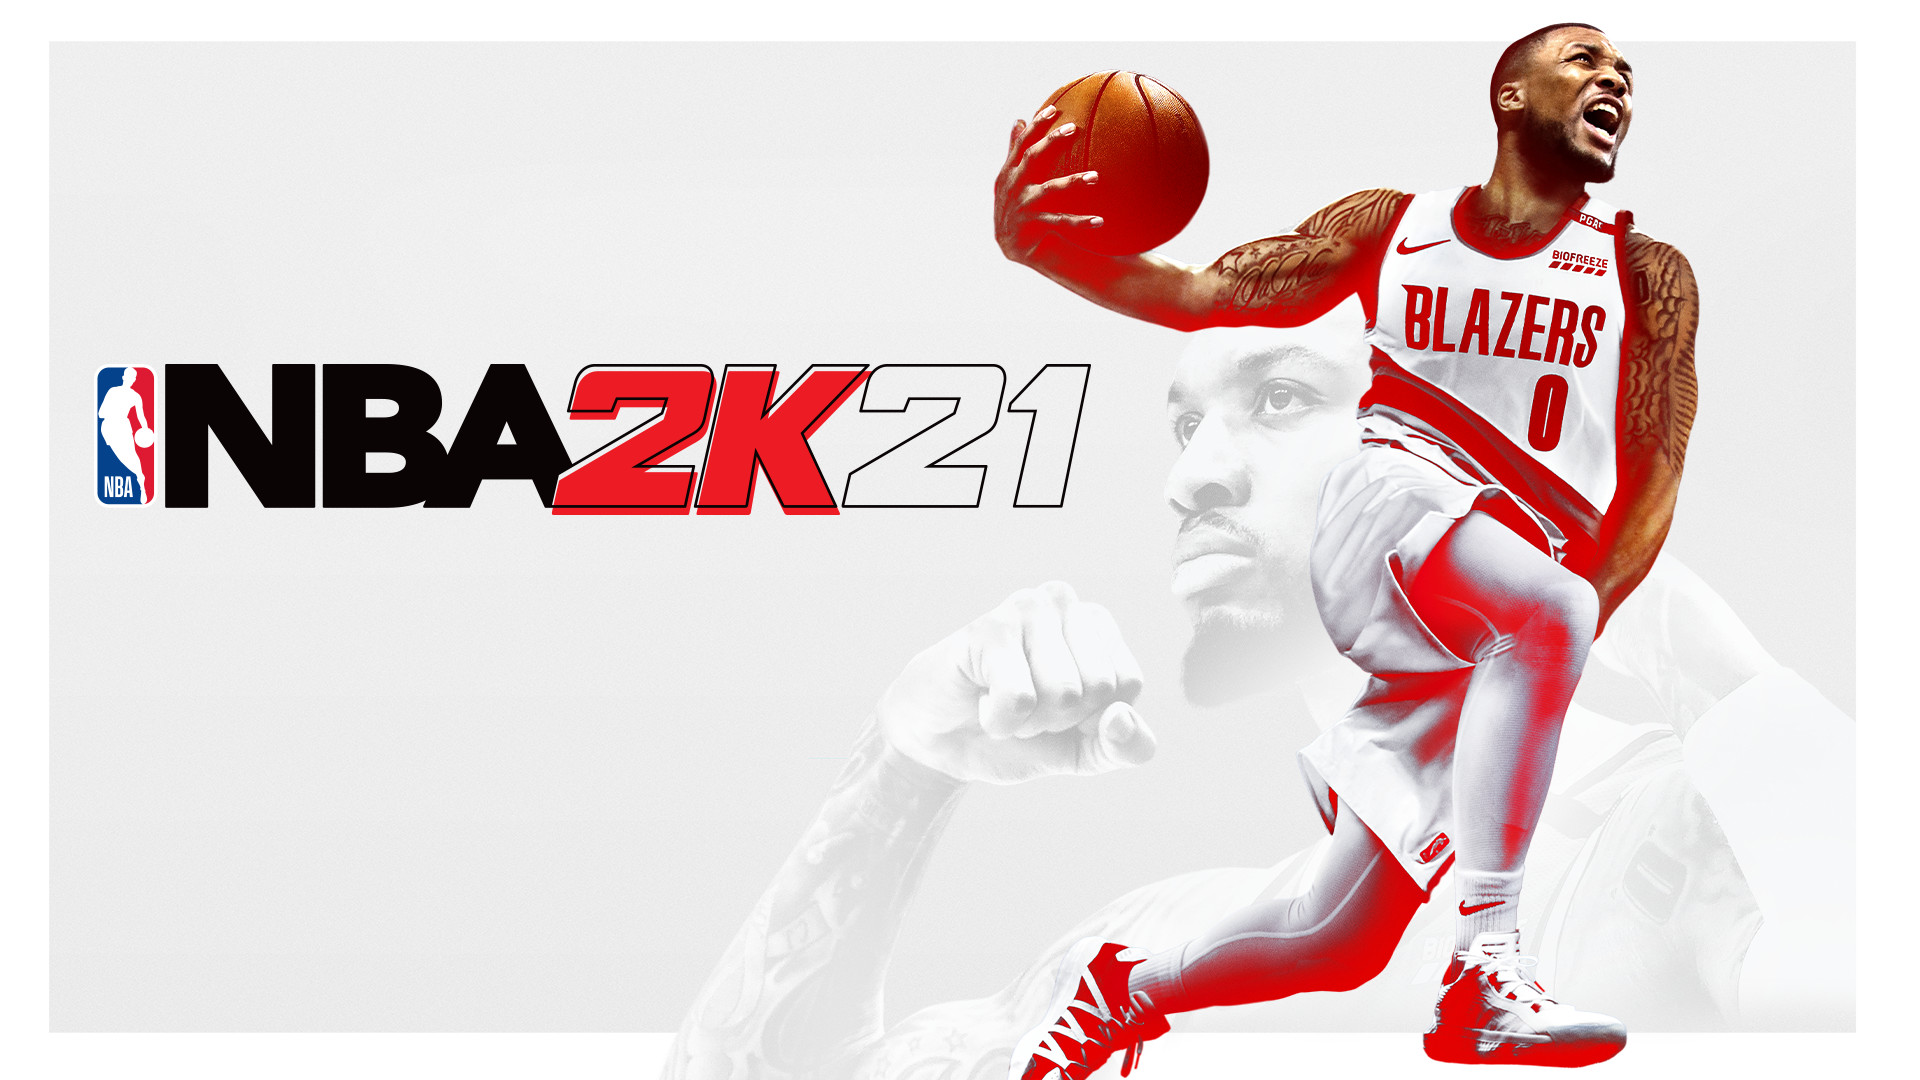 NBA 2K21 comes with a price bump for next-gen consoles